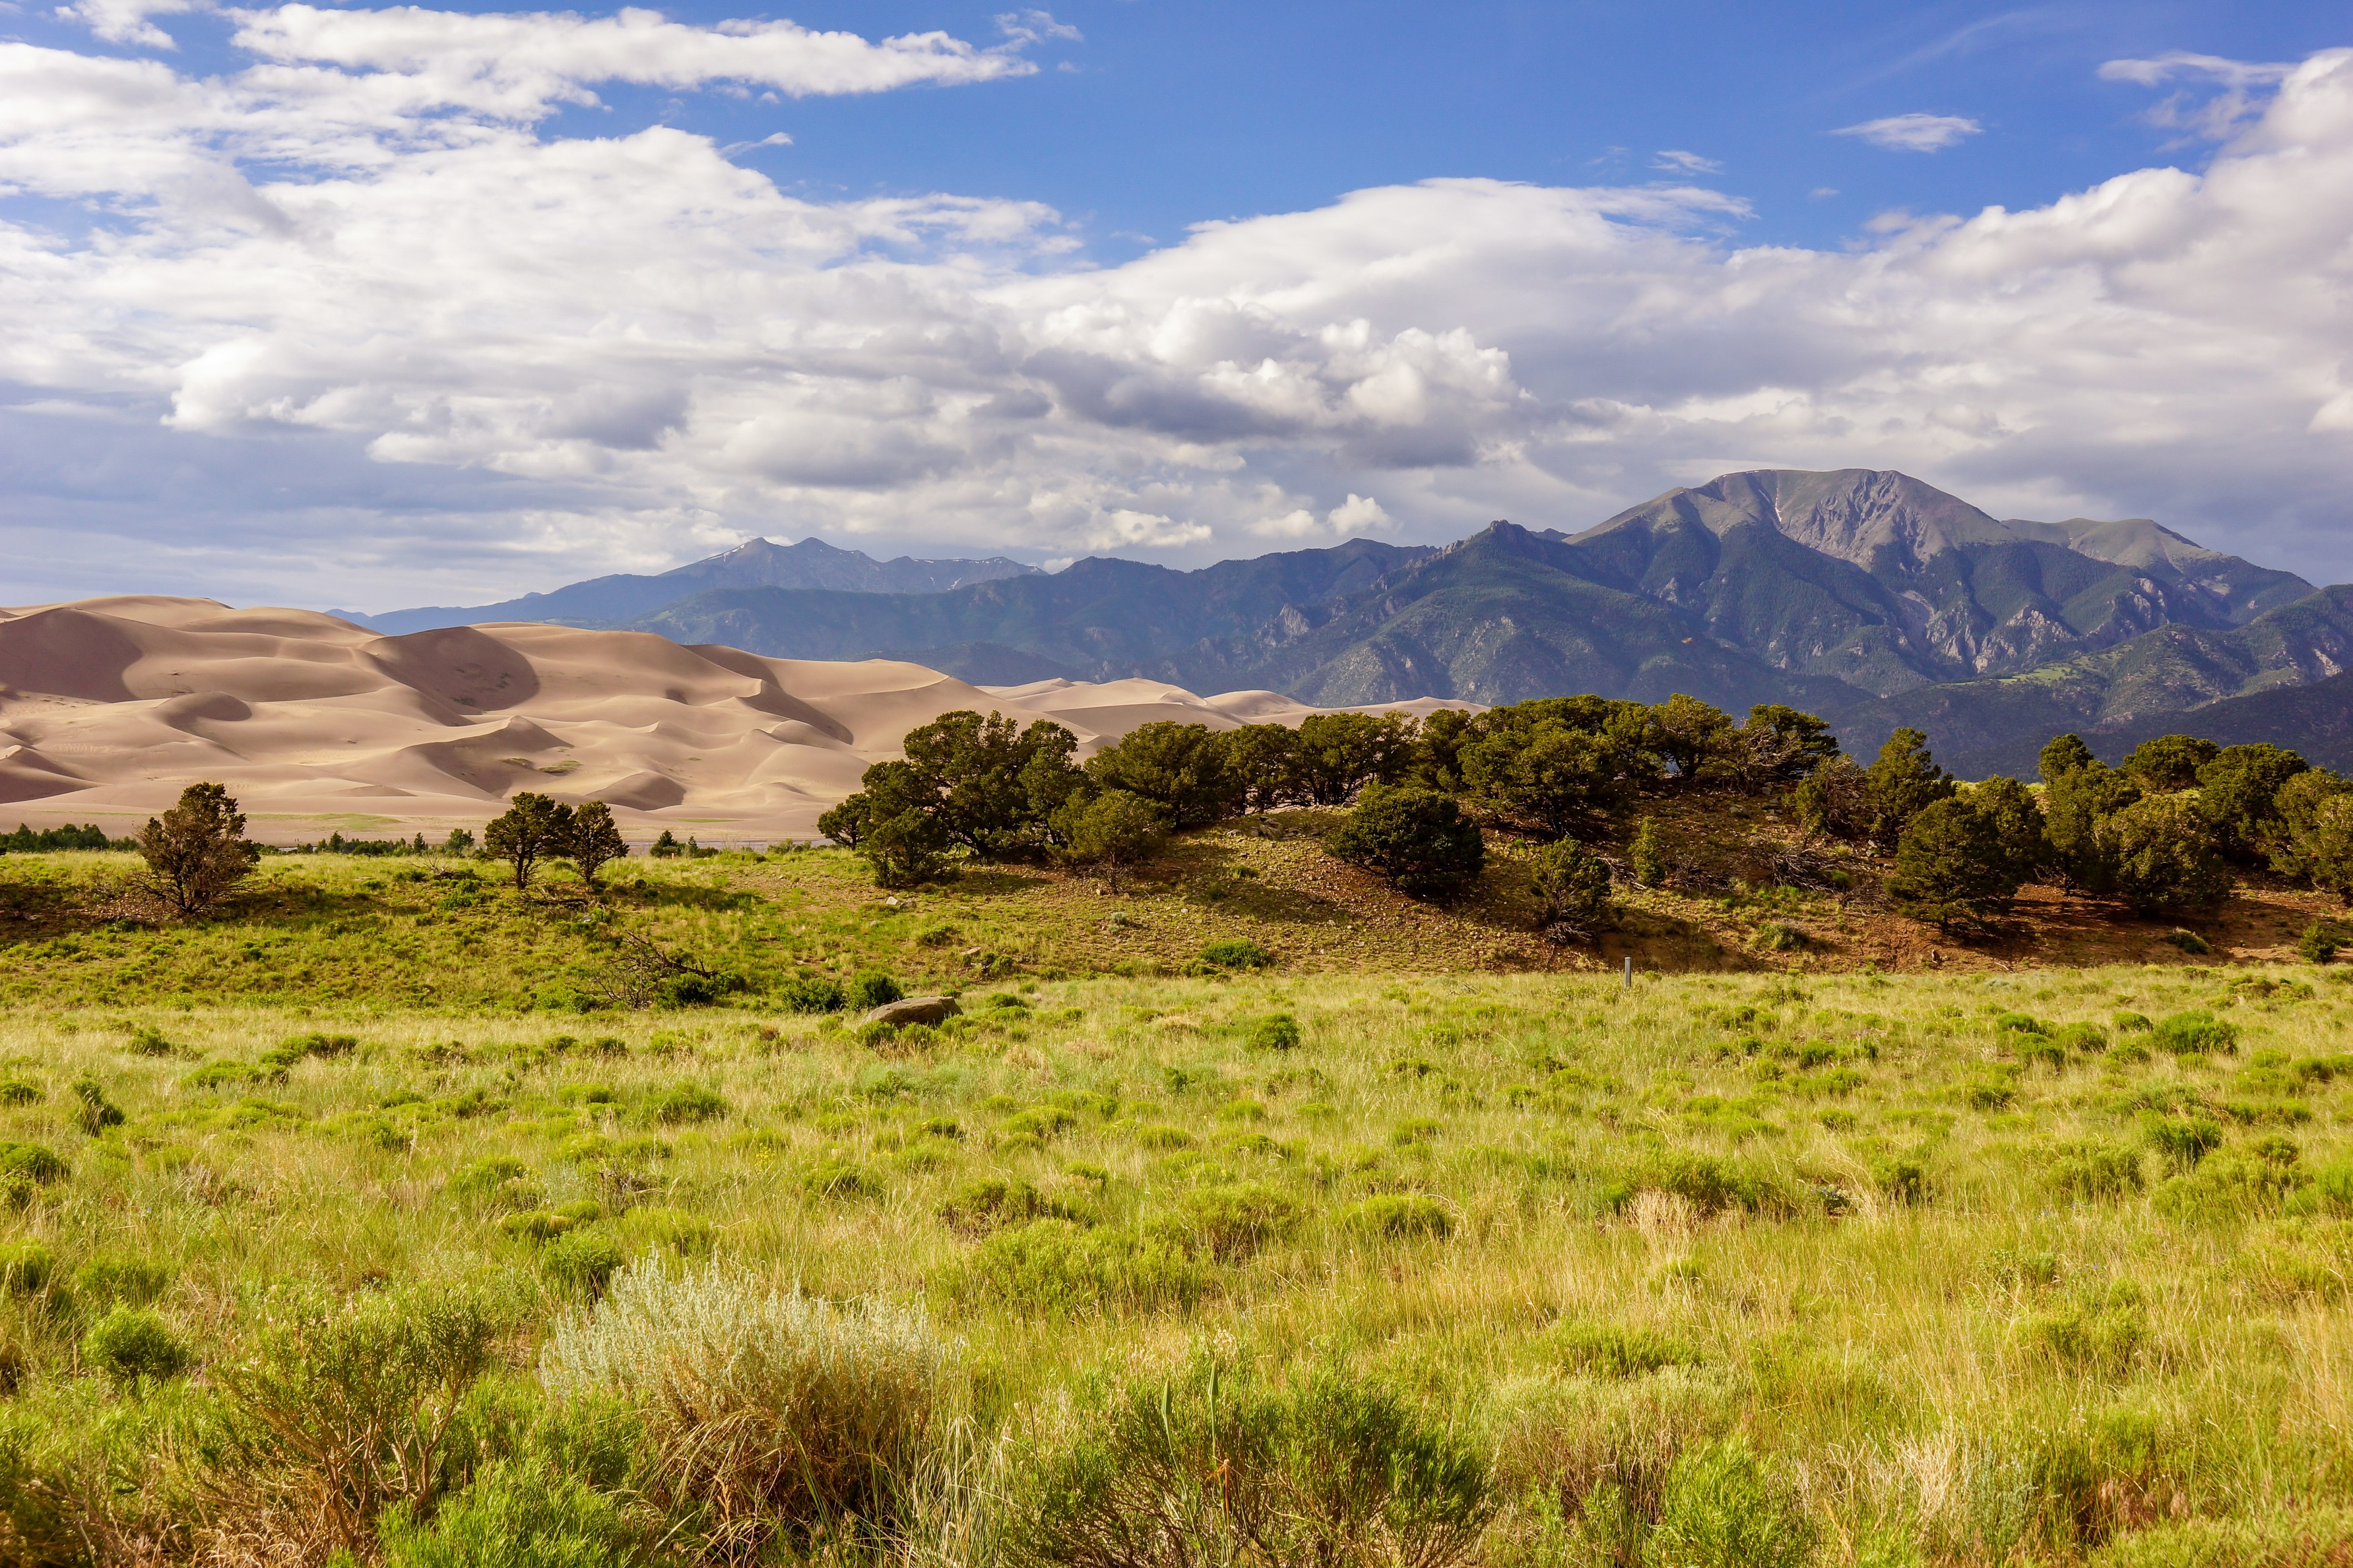 Grassy field that leads into sand dunes, then up to mountains.